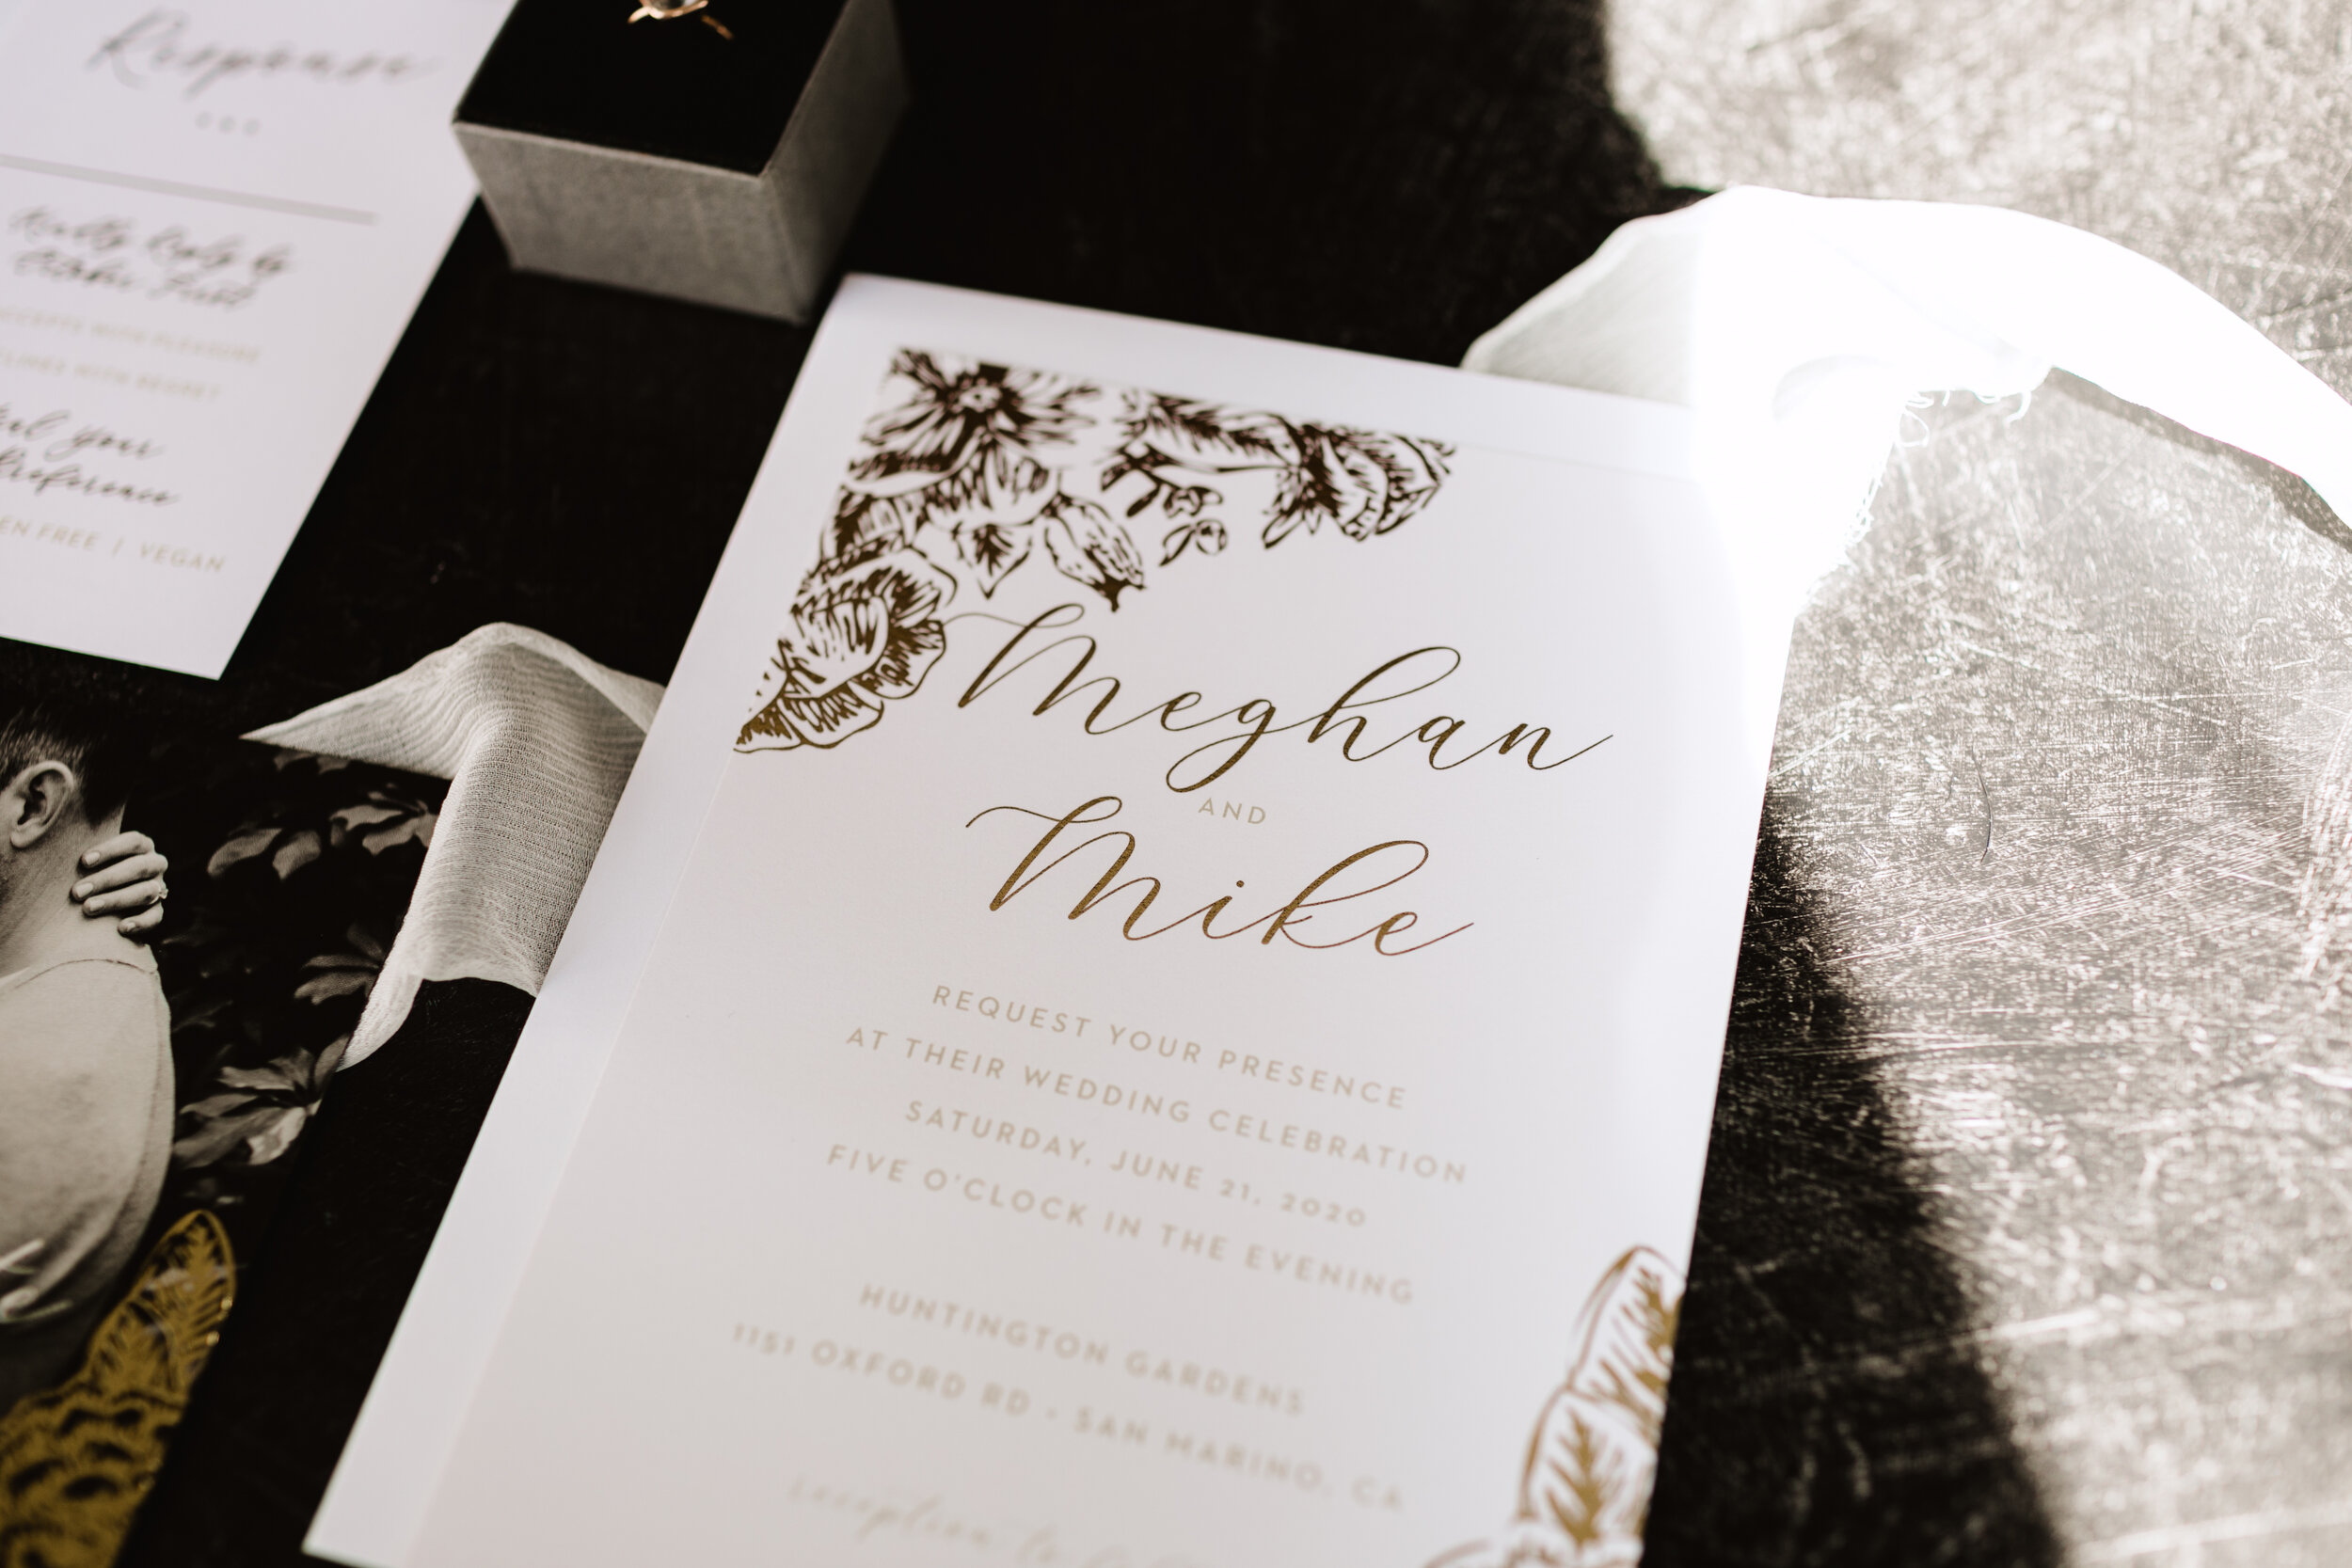 Basic Invite, Wedding Invitations, Save the Dates, Save the Date Maganets, Emily Wehner Photography-5.jpg